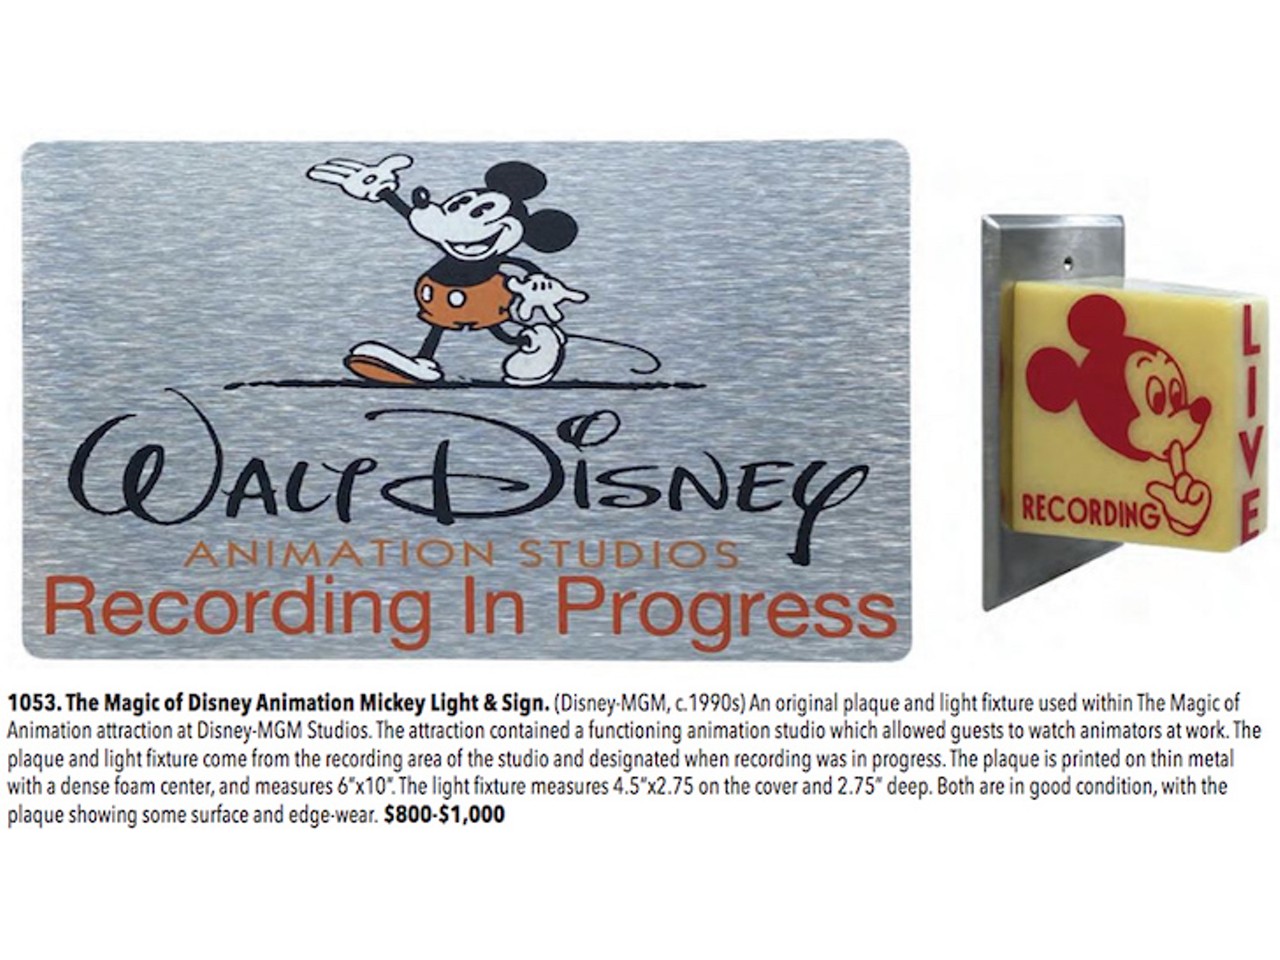 Every item from Walt Disney World up for sale at this weekend's enormous Disneyland auction